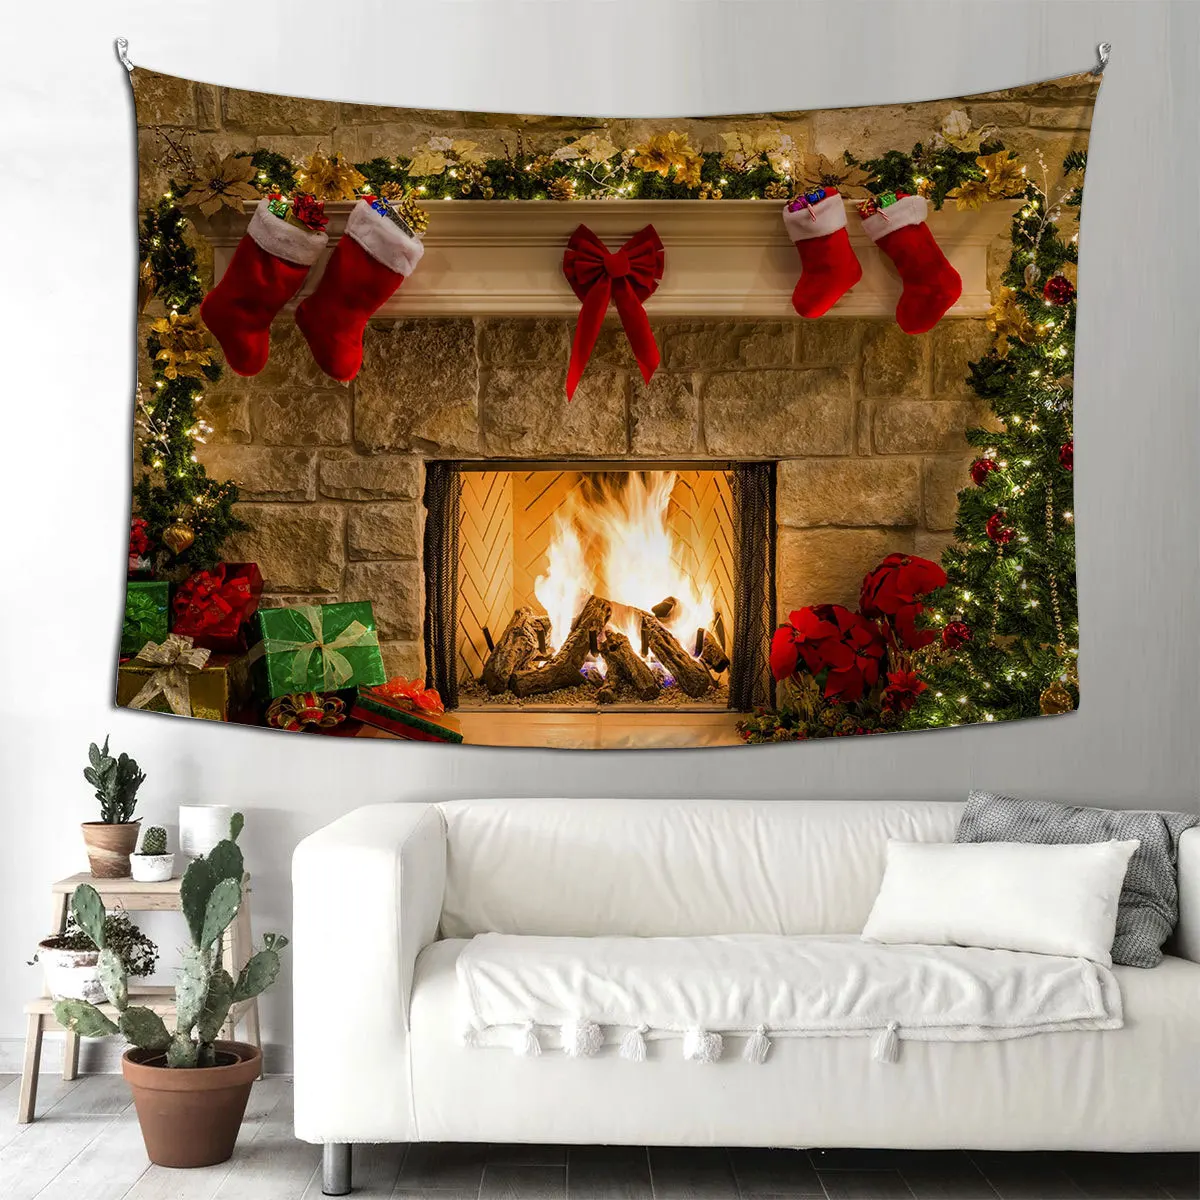 

Merry Christmas Tapestry Fireplace Xmas Tree Stockings Gifts Wall Hanging Art for Living Room Dorm Festival Decor in 150x230cm